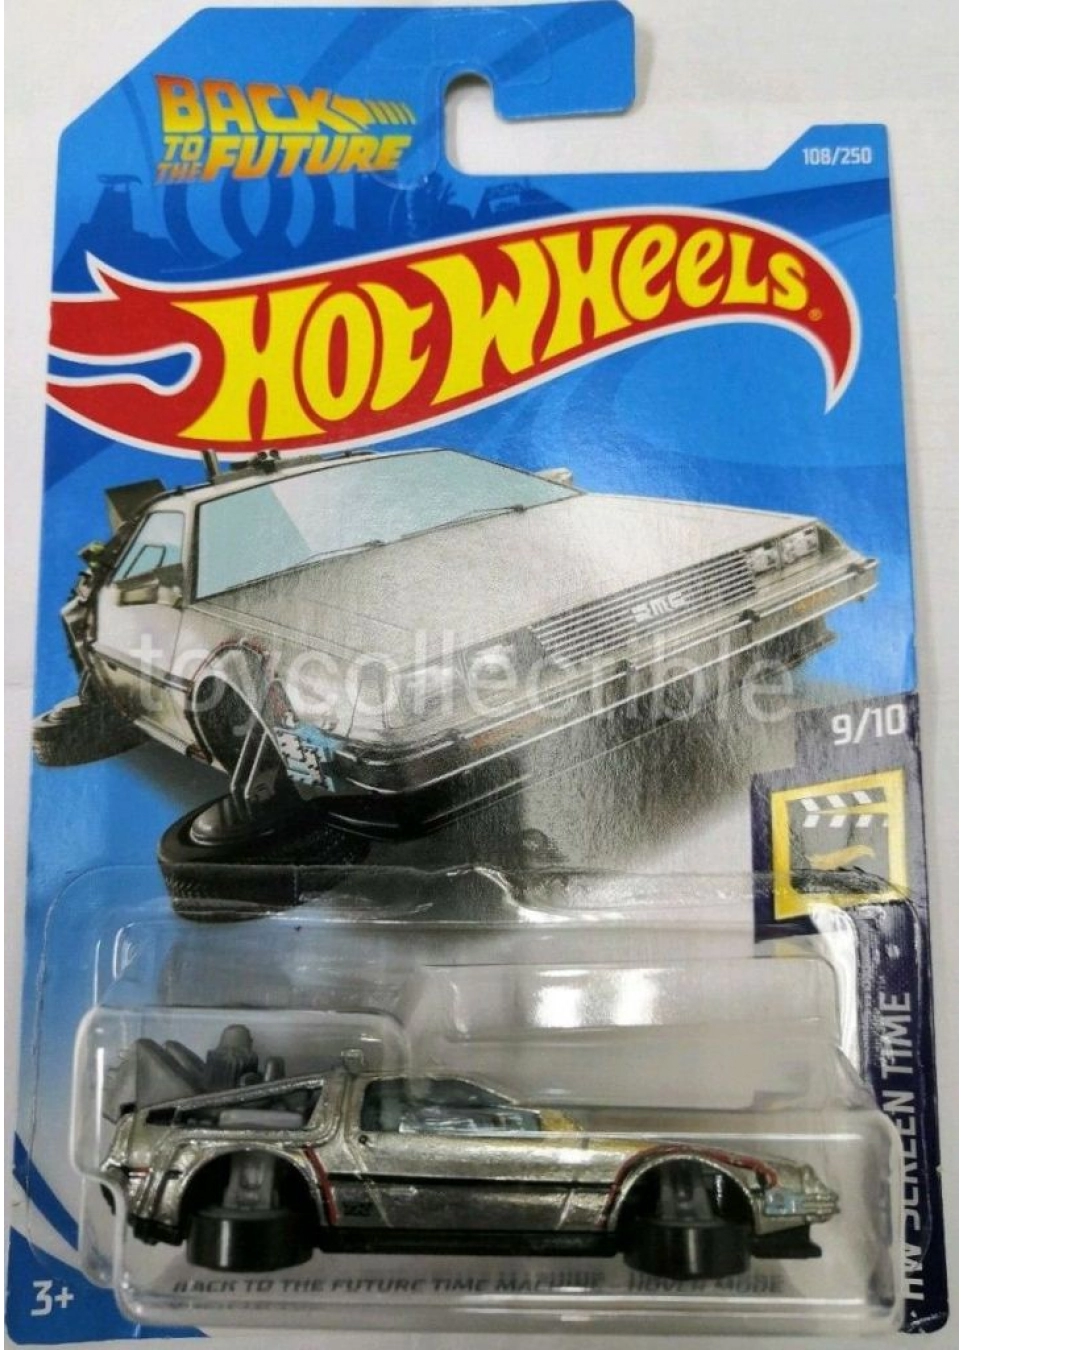 Hot Wheels 2019-108 1:64 BACK TO THE FUTURE TIME MACHINE HOVER MODE Model Cars 